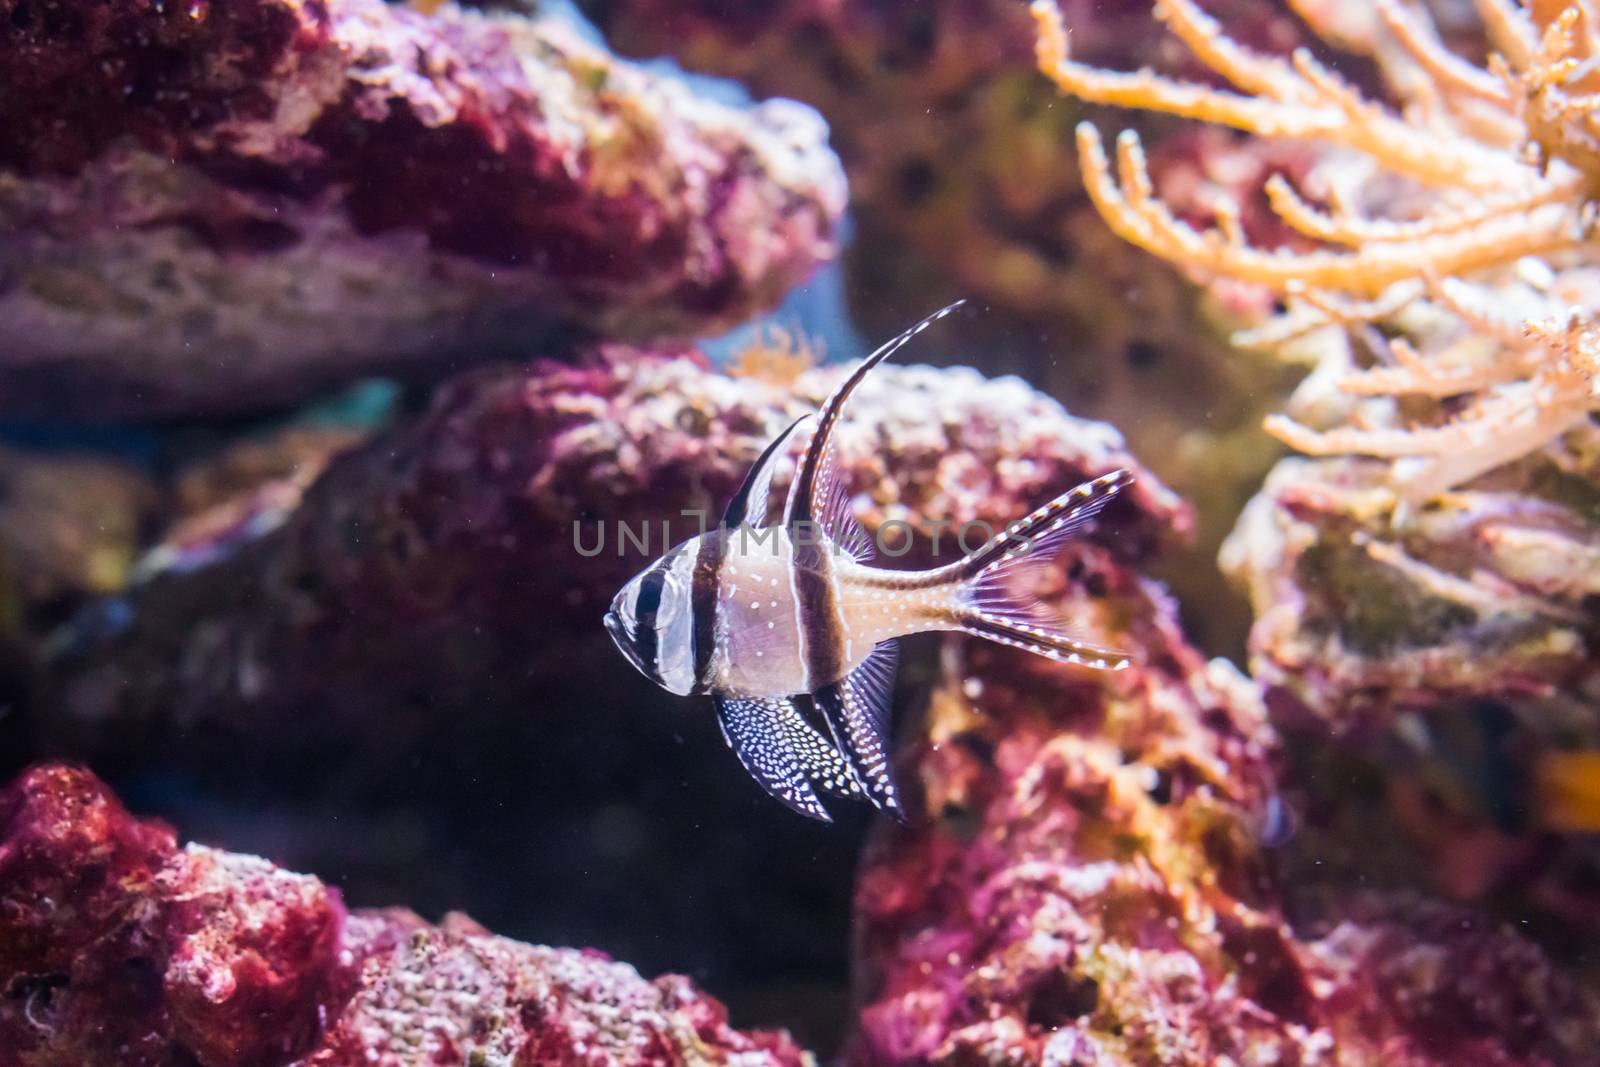 Banggai cardinal fish, a popular aquarium pet that is endangered and only lives in the Banggai islands of Indonesia